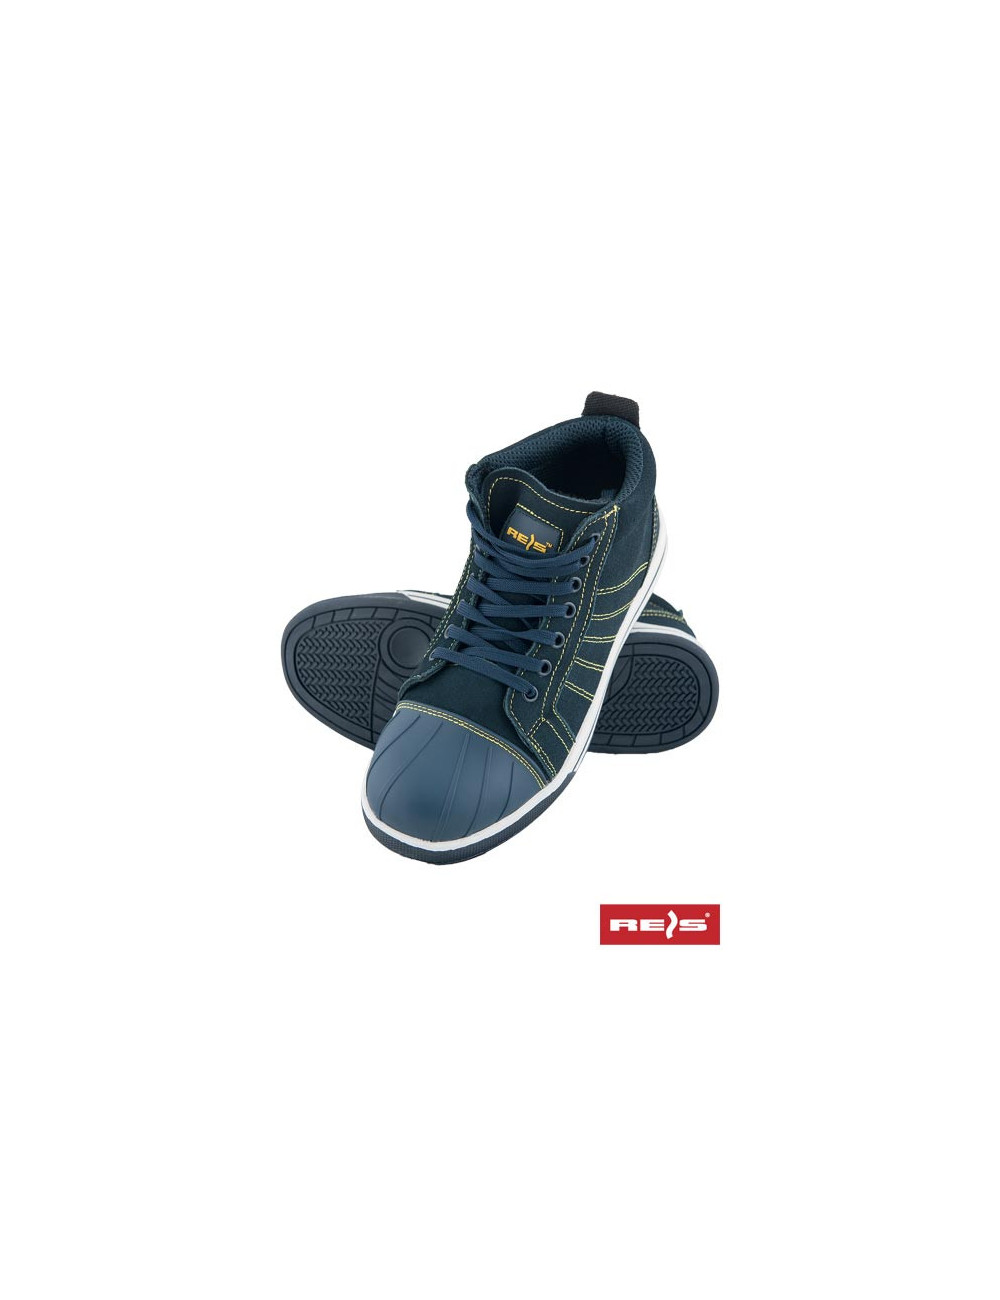 Safety shoes brfence gy navy and yellow Reis